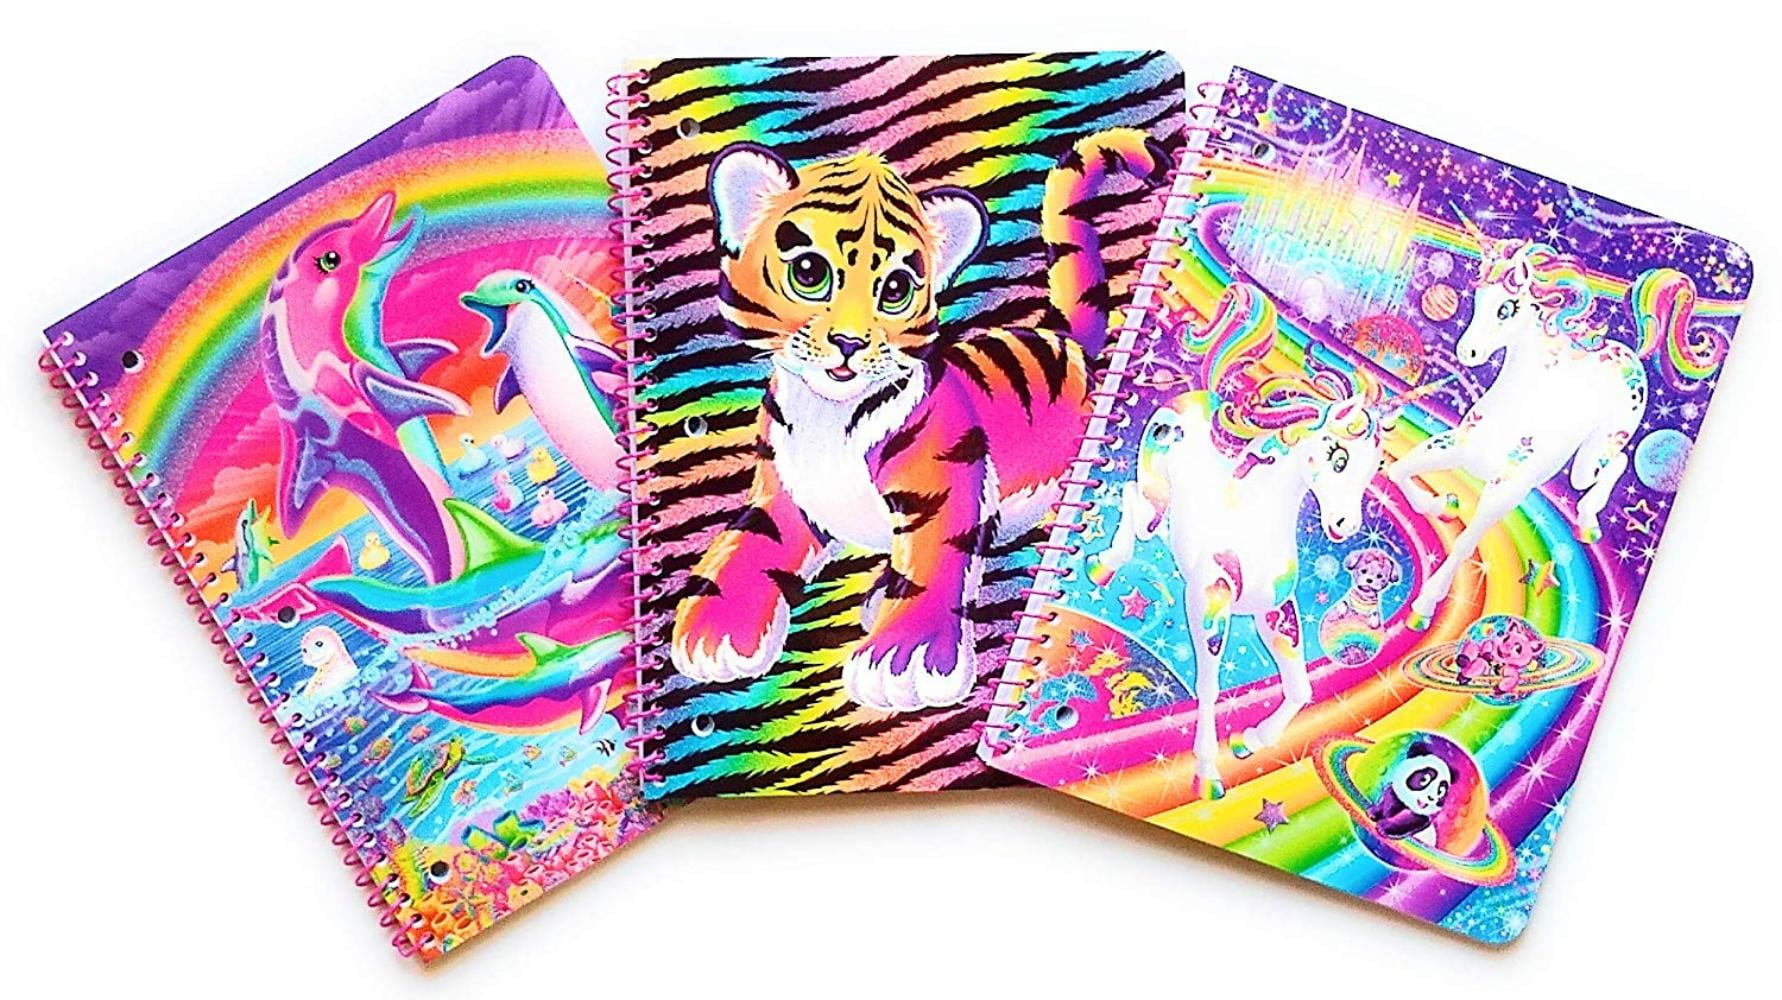 Composition Book Colorful Tiger School Supplies Lisa Frank Spiral Notebook 